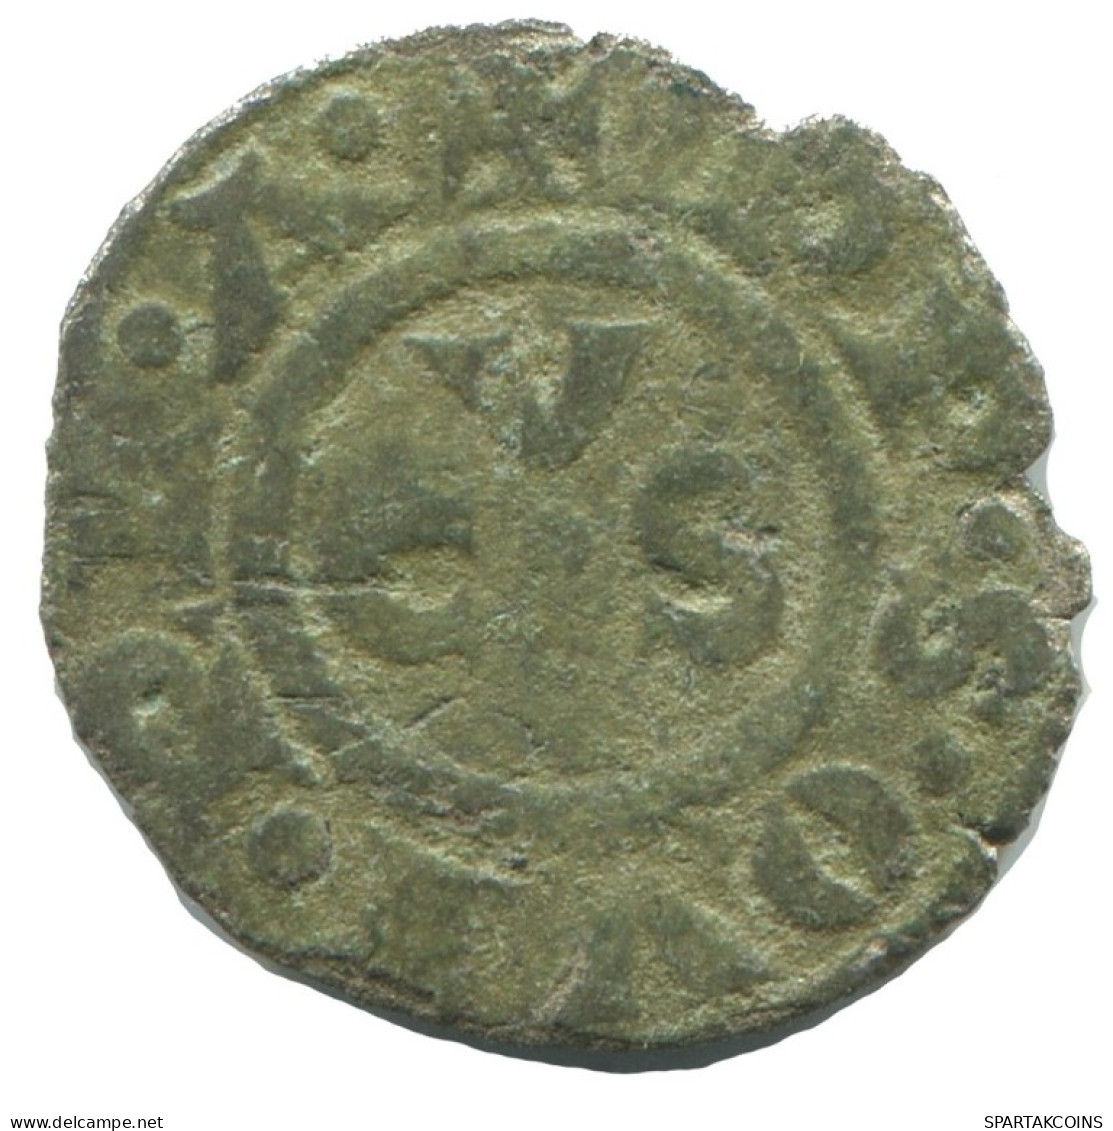 CRUSADER CROSS Authentic Original MEDIEVAL EUROPEAN Coin 0.5g/15mm #AC131.8.E.A - Other - Europe